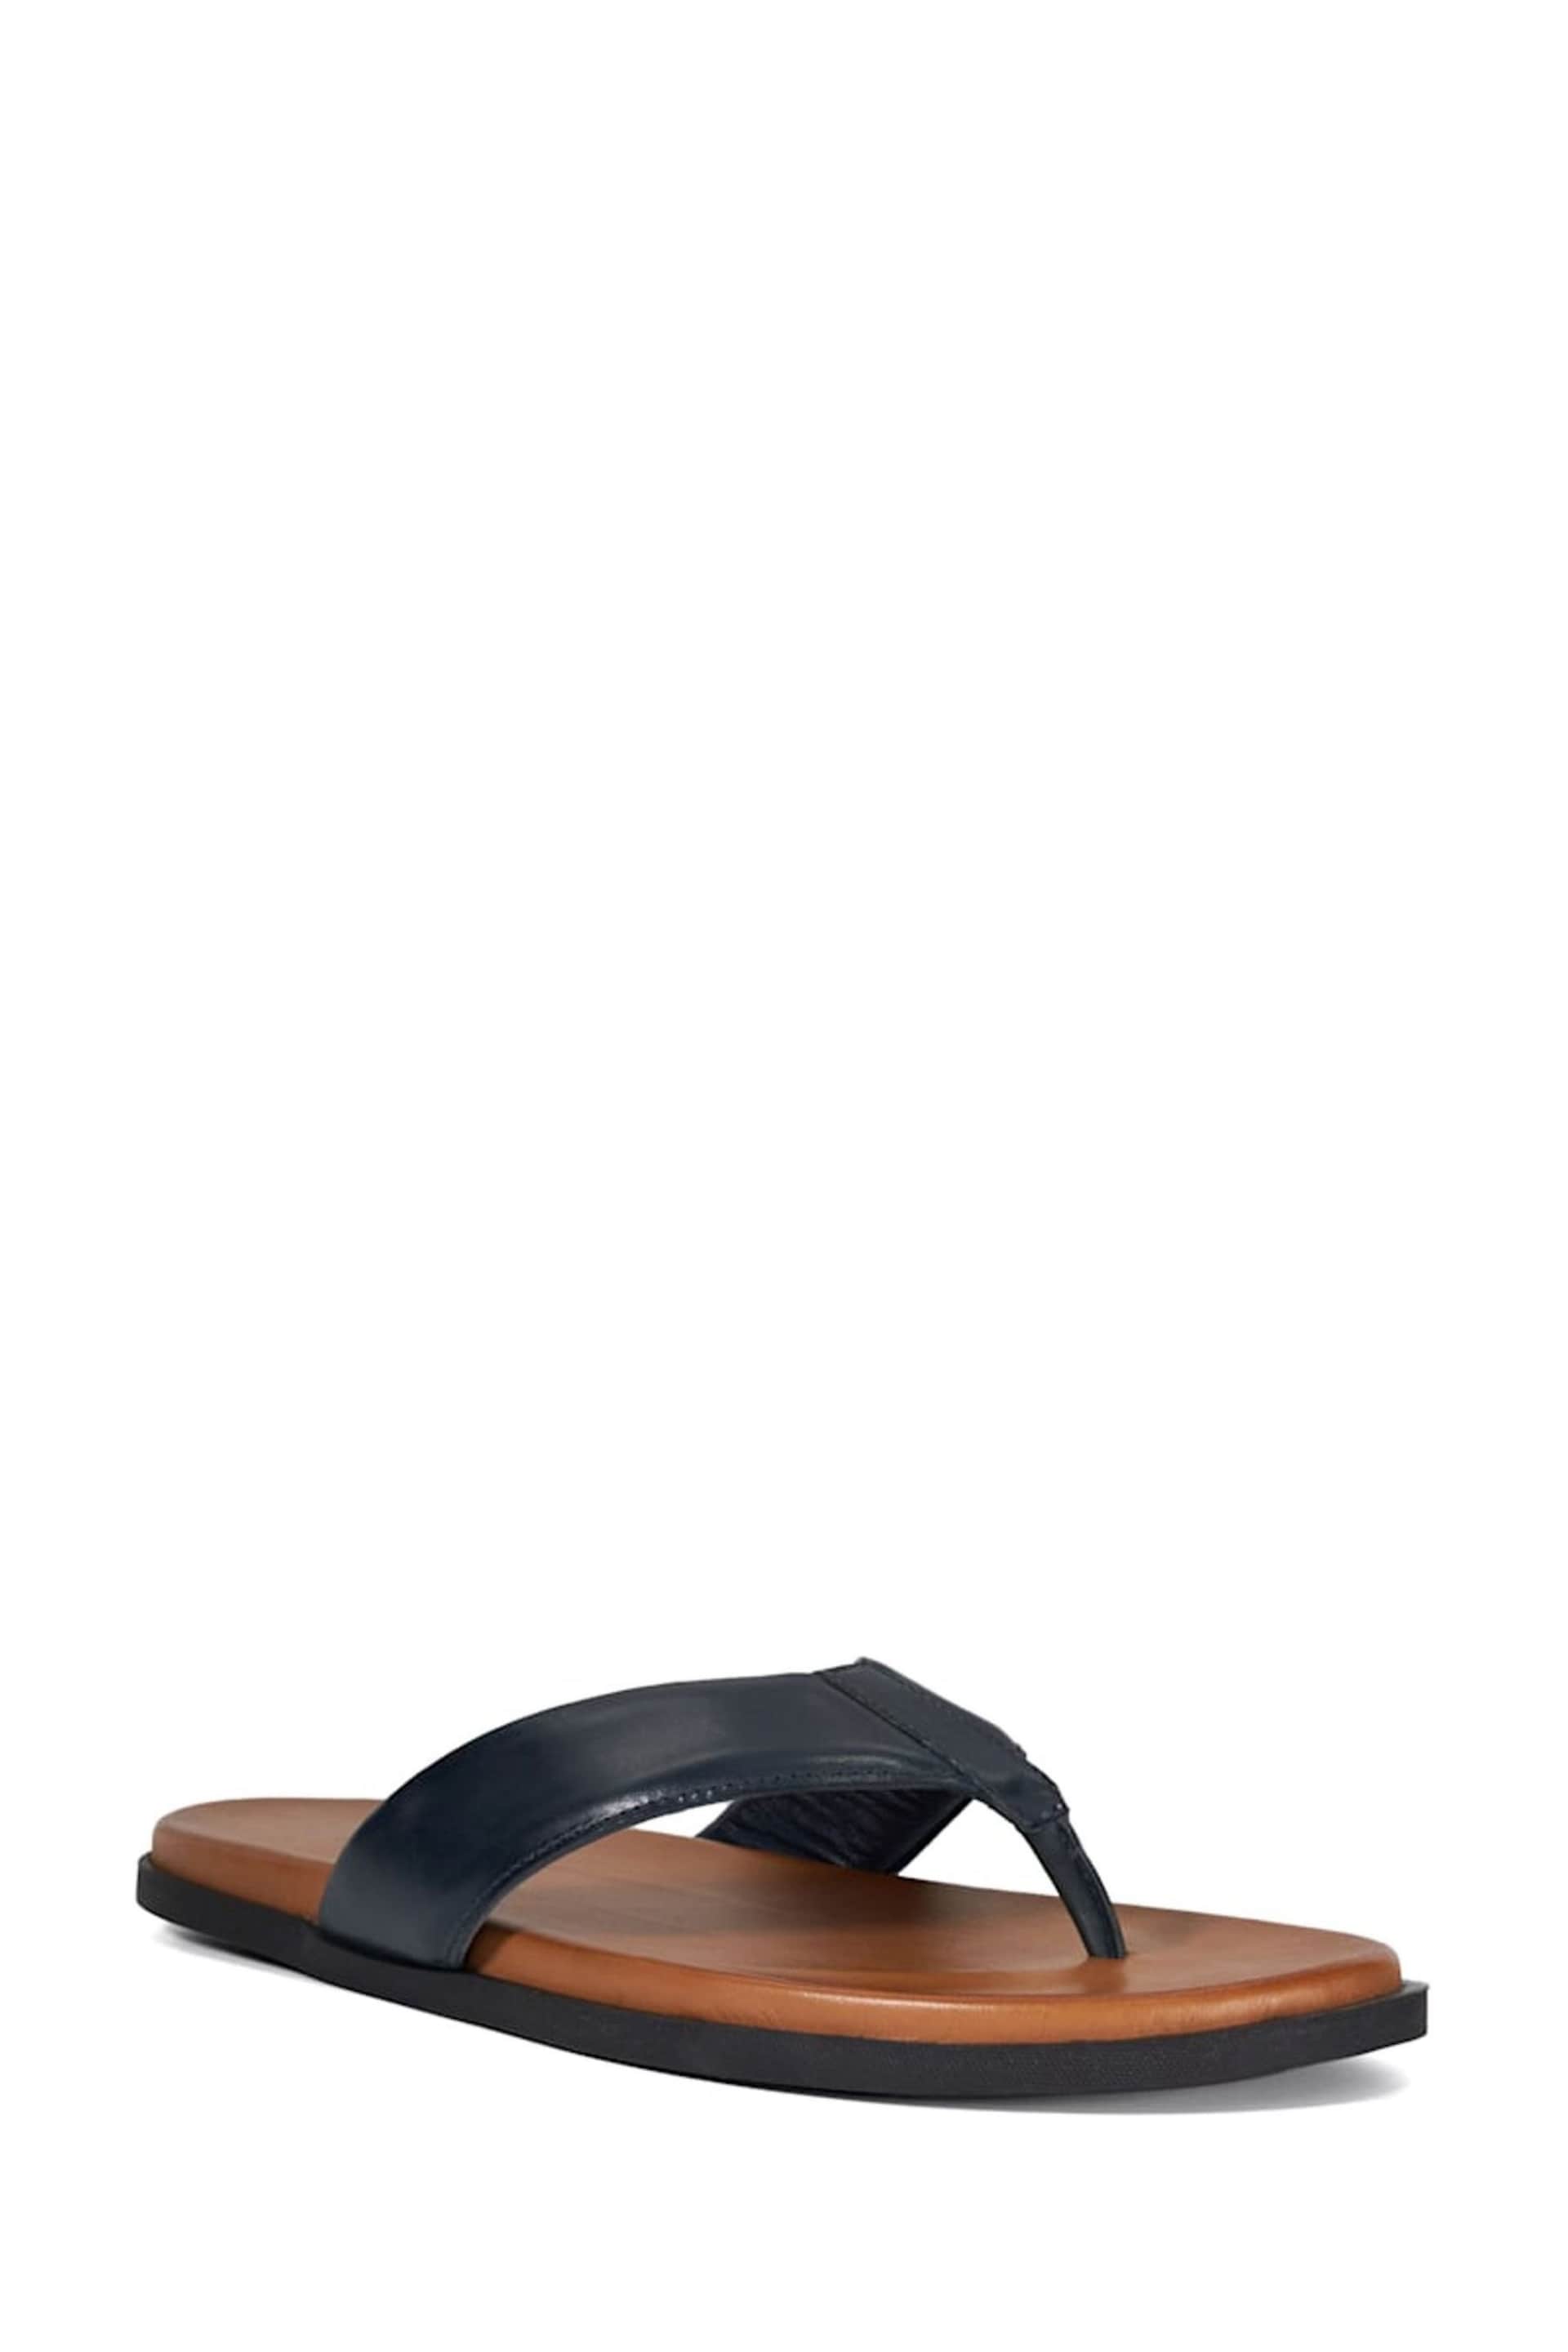 Dune London Blue Inspires Toe Post Leather Sandals - Image 3 of 7